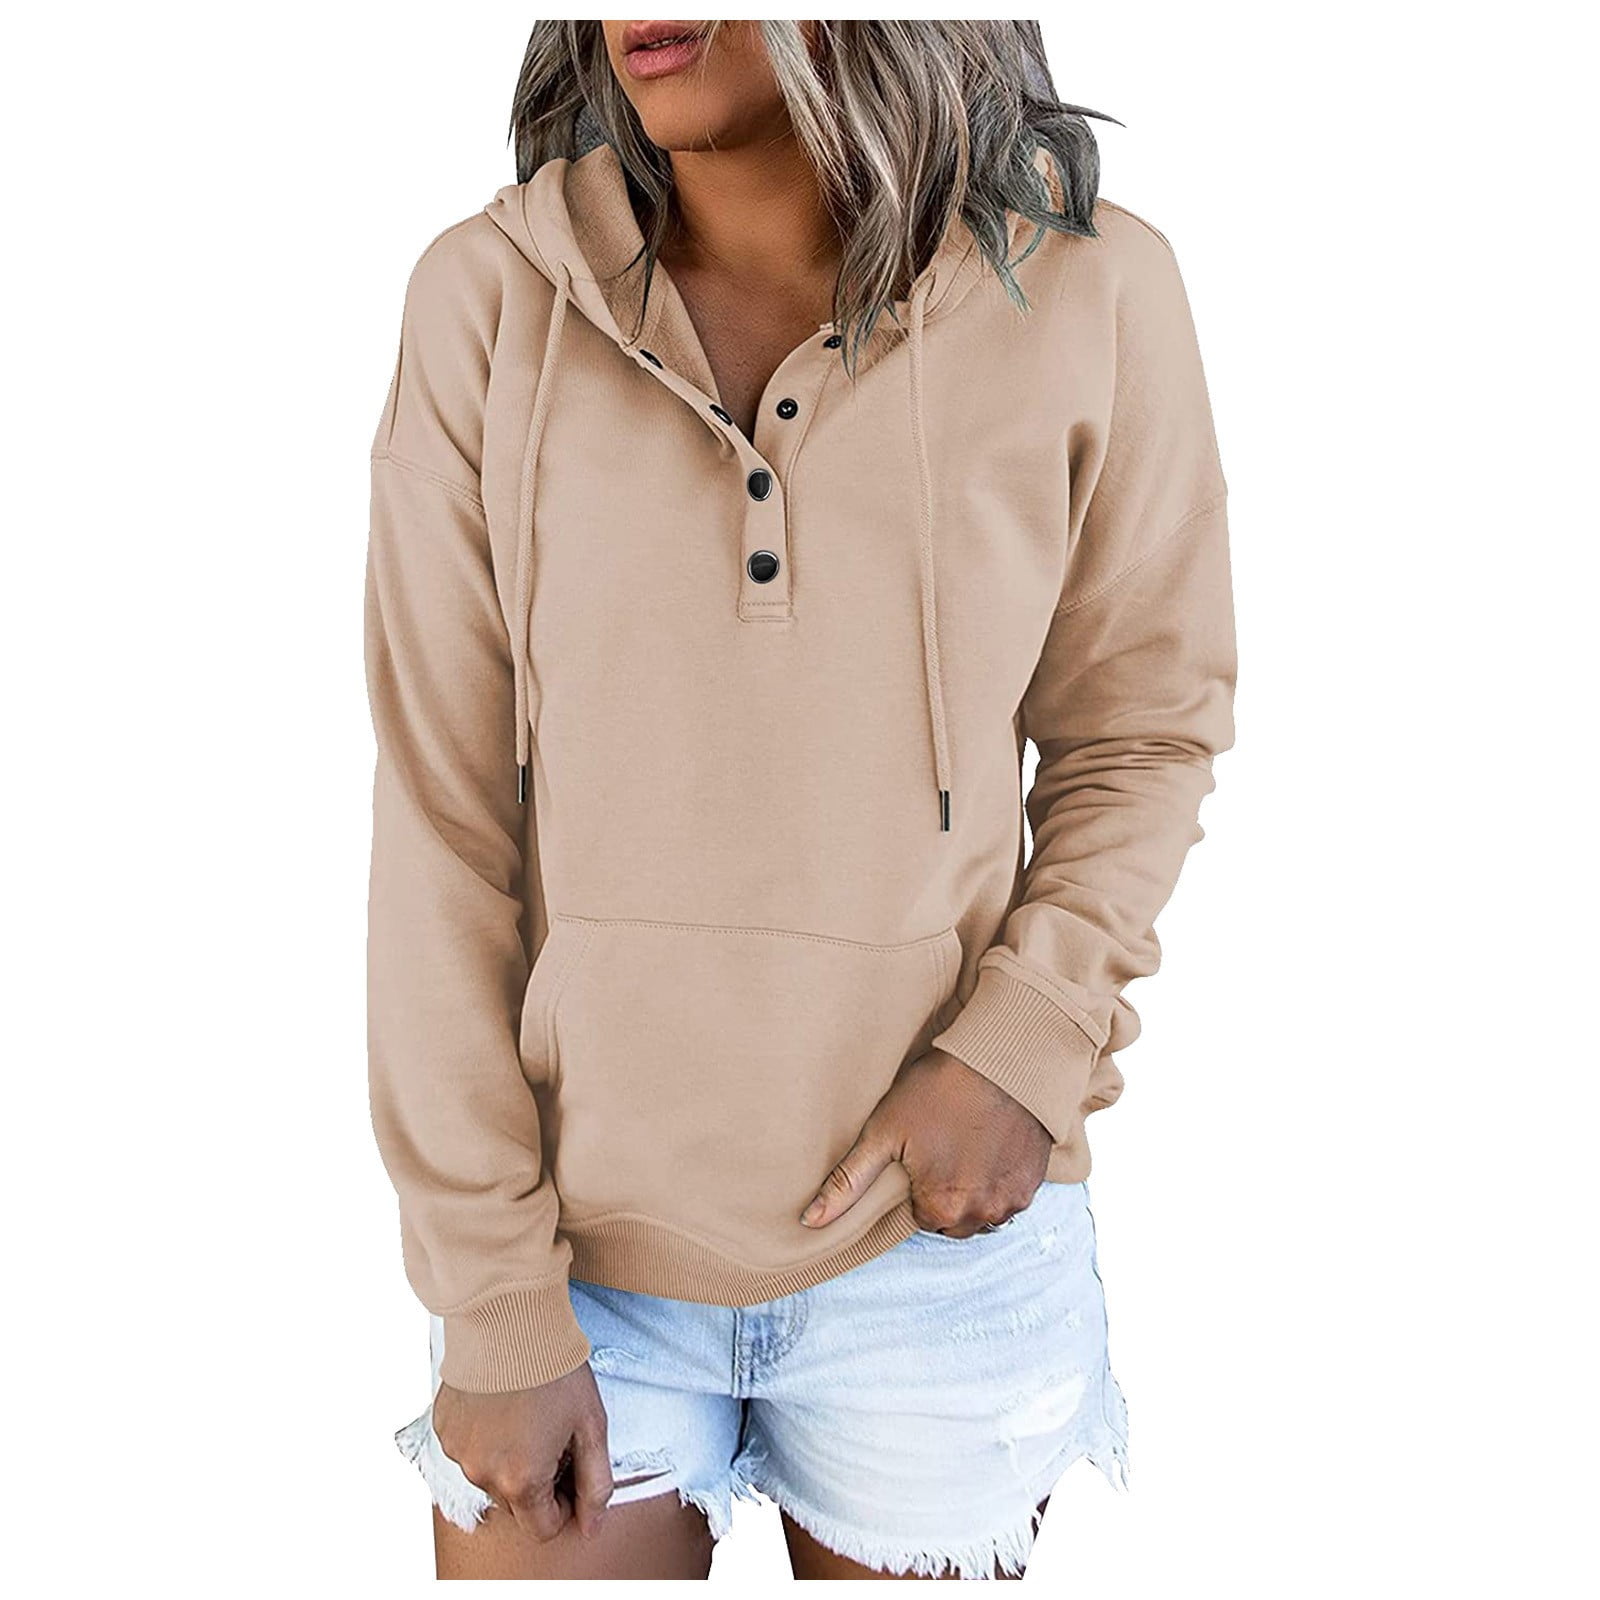 Kddylitq Swesweatshirts Hoodies for Women Knit Sweater Clips to Hold Sweater Together V Neck Long Sleeve Patchwork Mix Color Hooded 3/4 Zipper